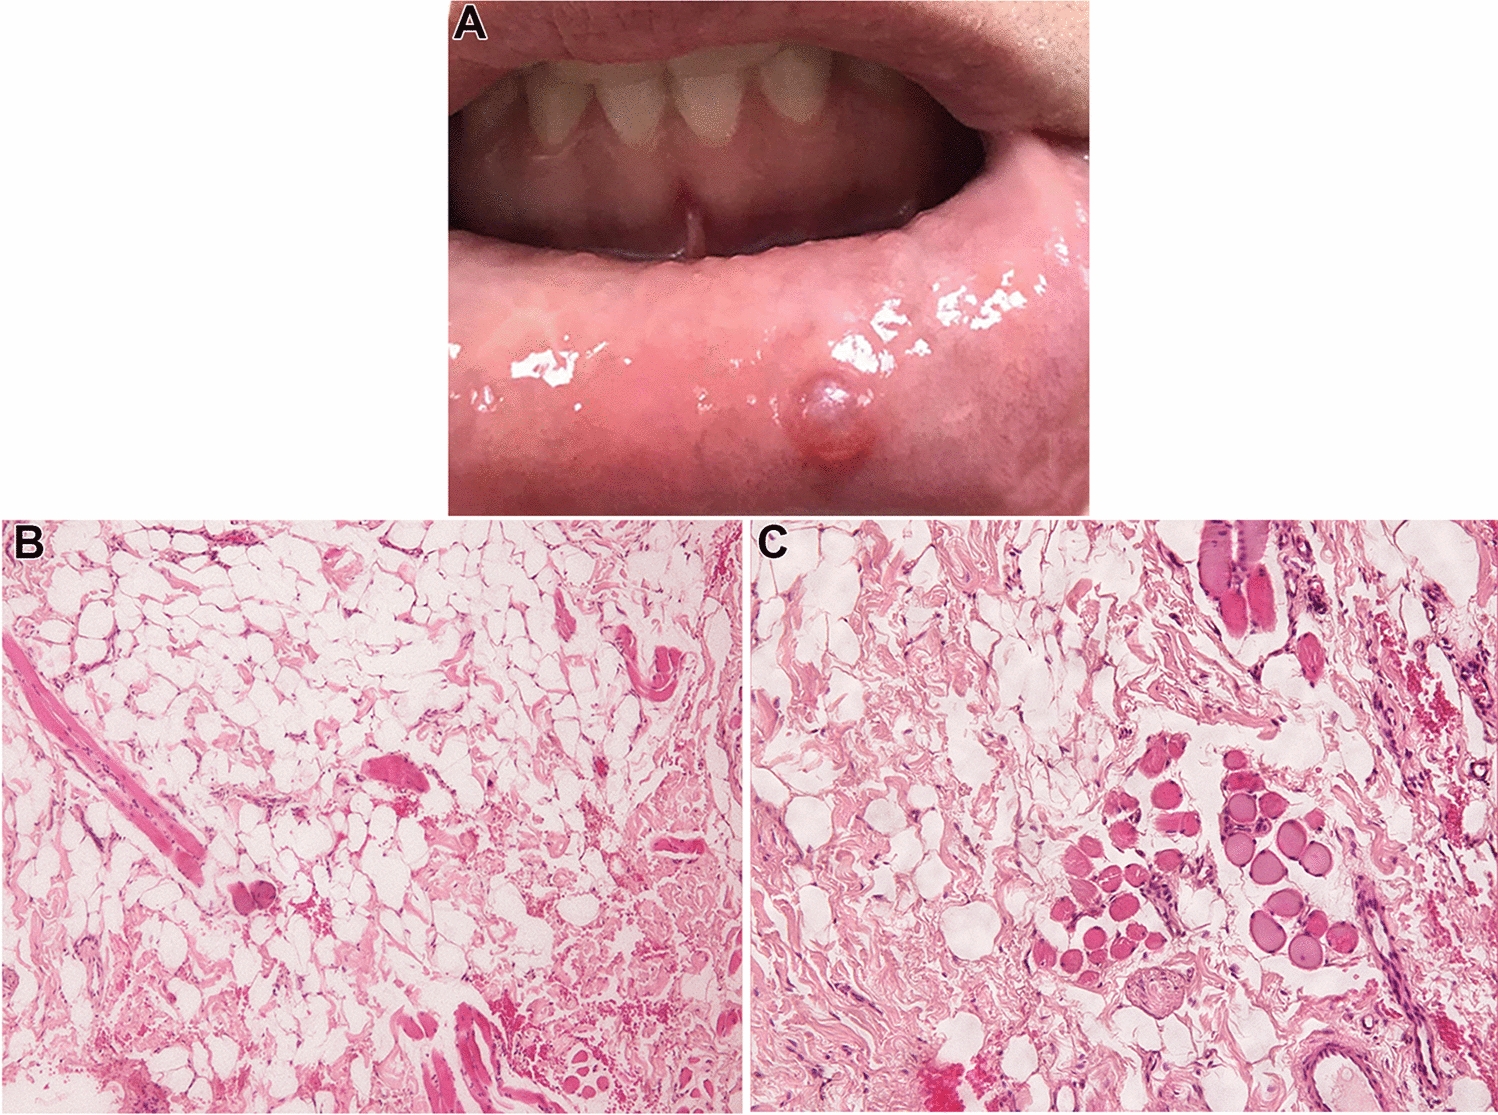 Oral Intramuscular Lipoma with Unusual Clinical Presentation: Differential Diagnosis and Review of the Literature